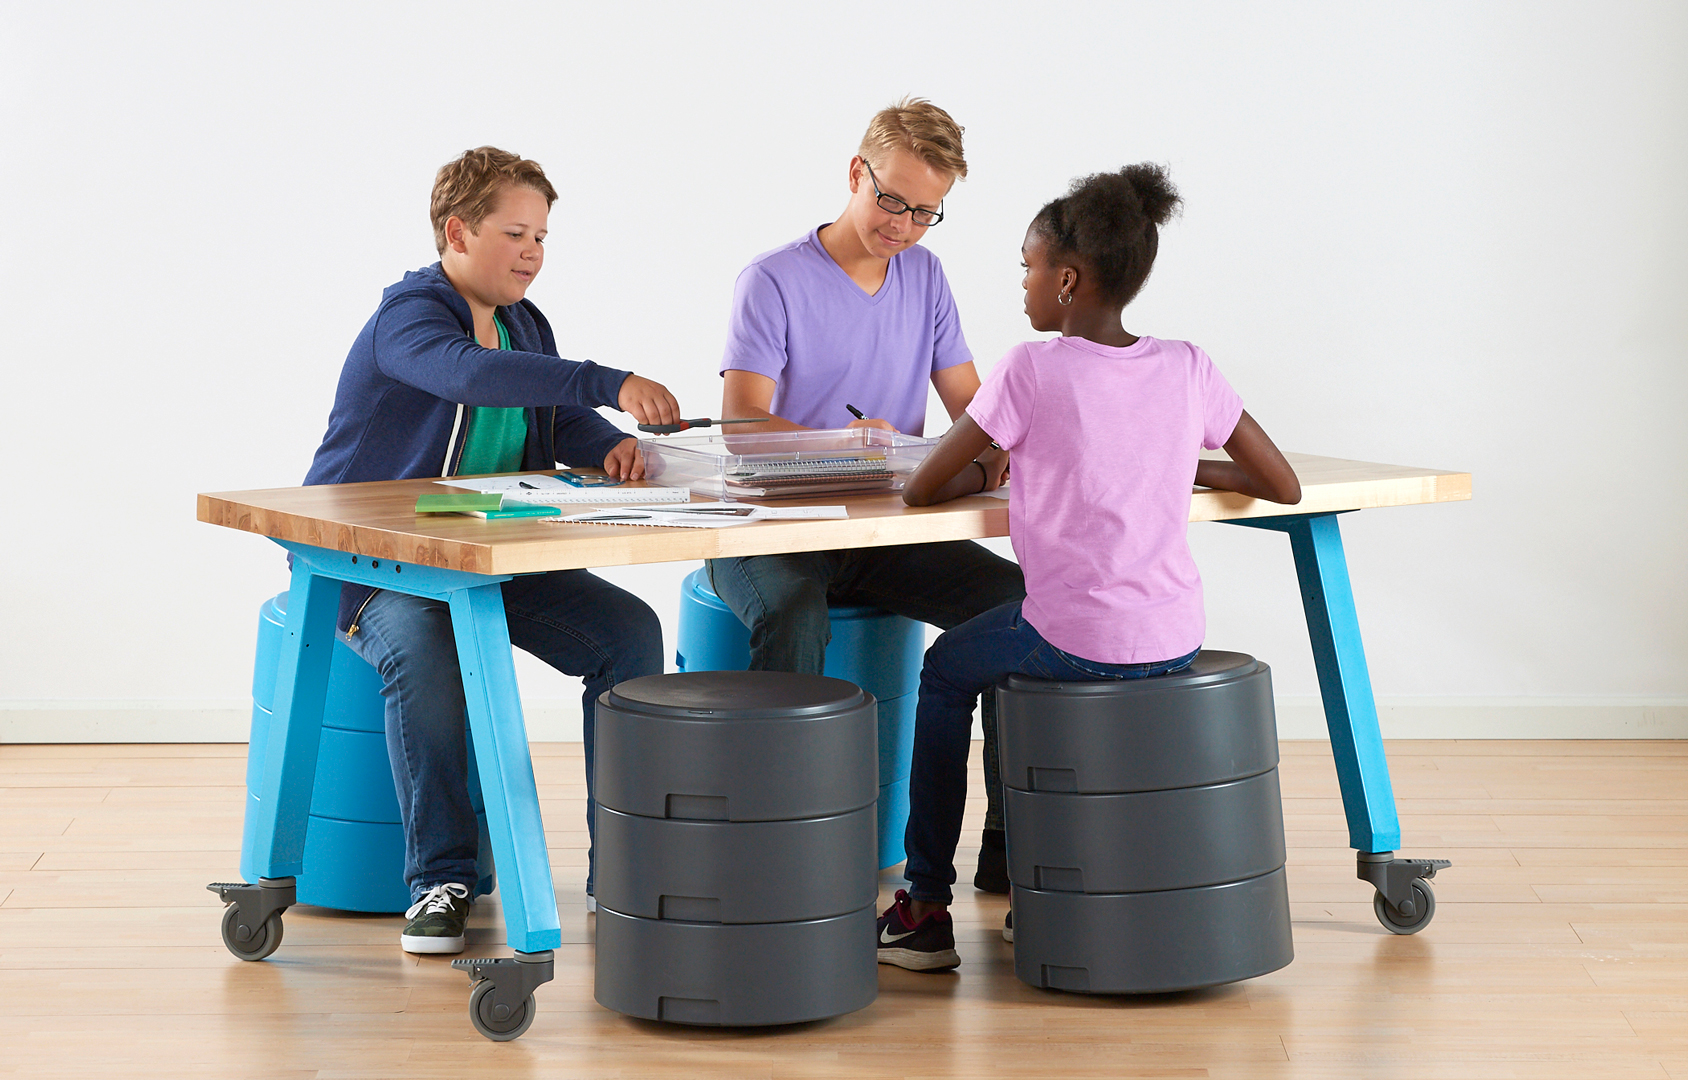 Top 10 Benefits of a Flexible-Seating Classroom - Smith System Blog